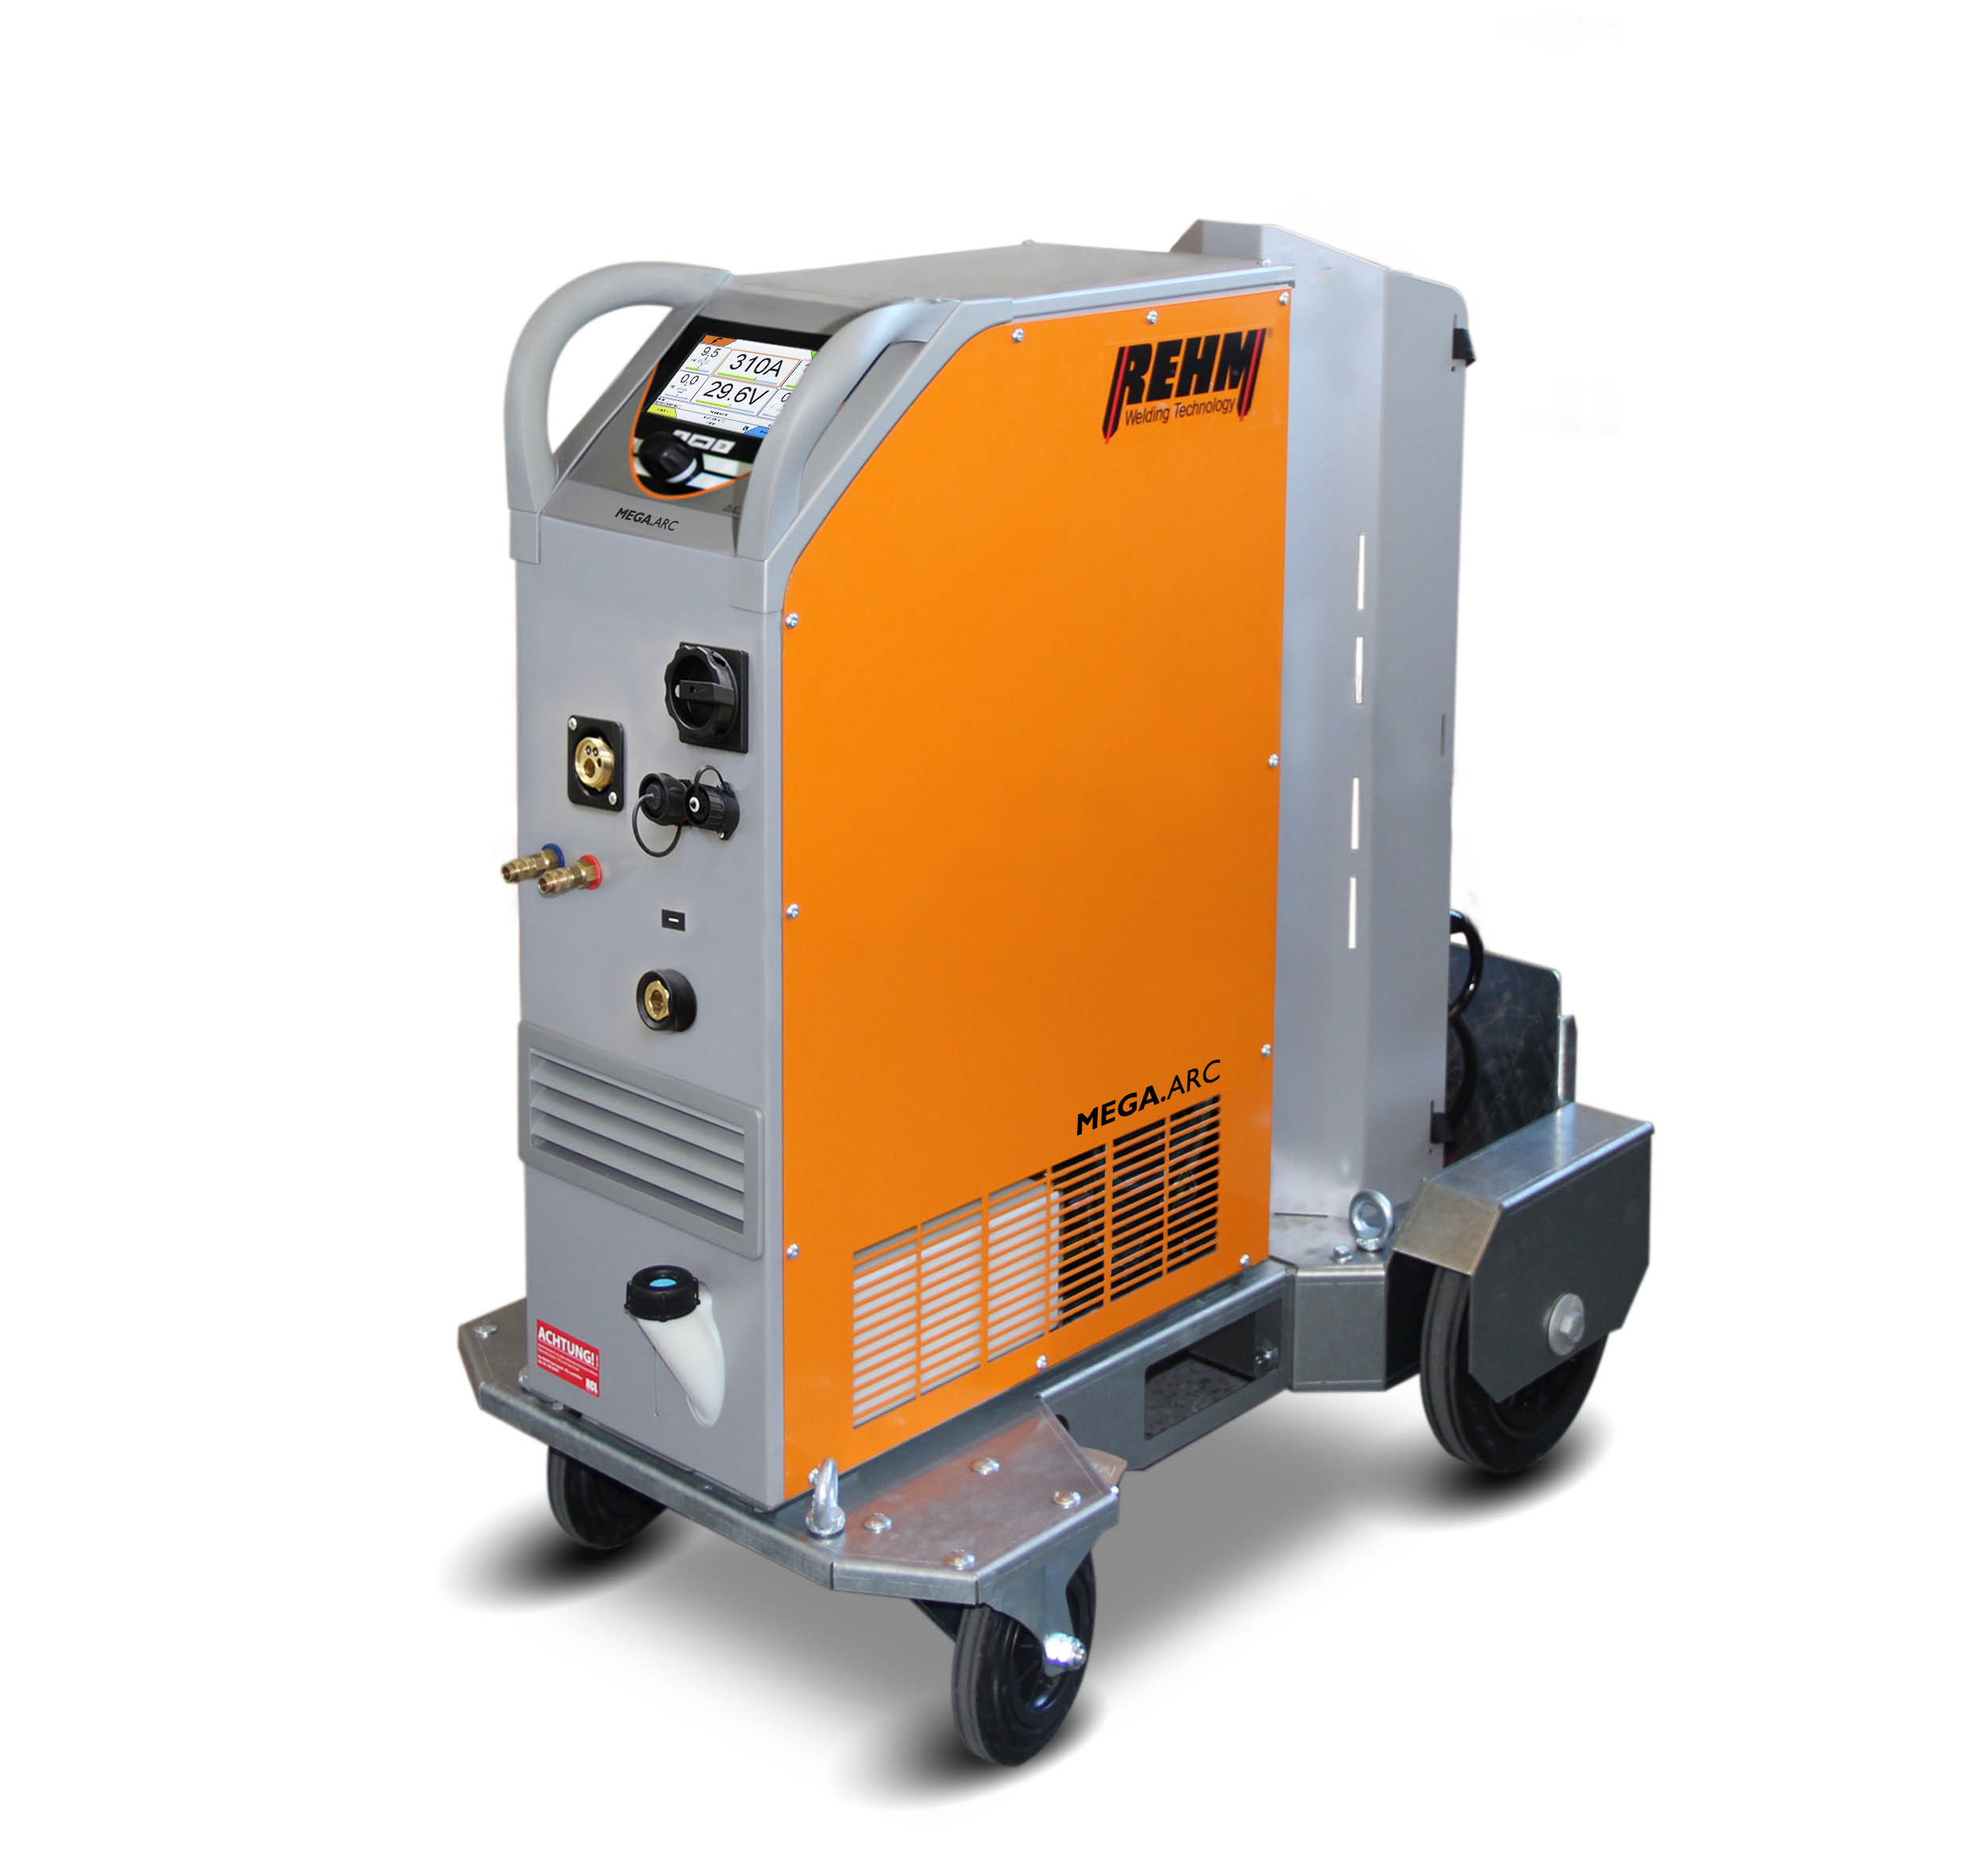 More information about the MIG / MAG welding machine MEGA.ARC P and S by REHM Welding Technology